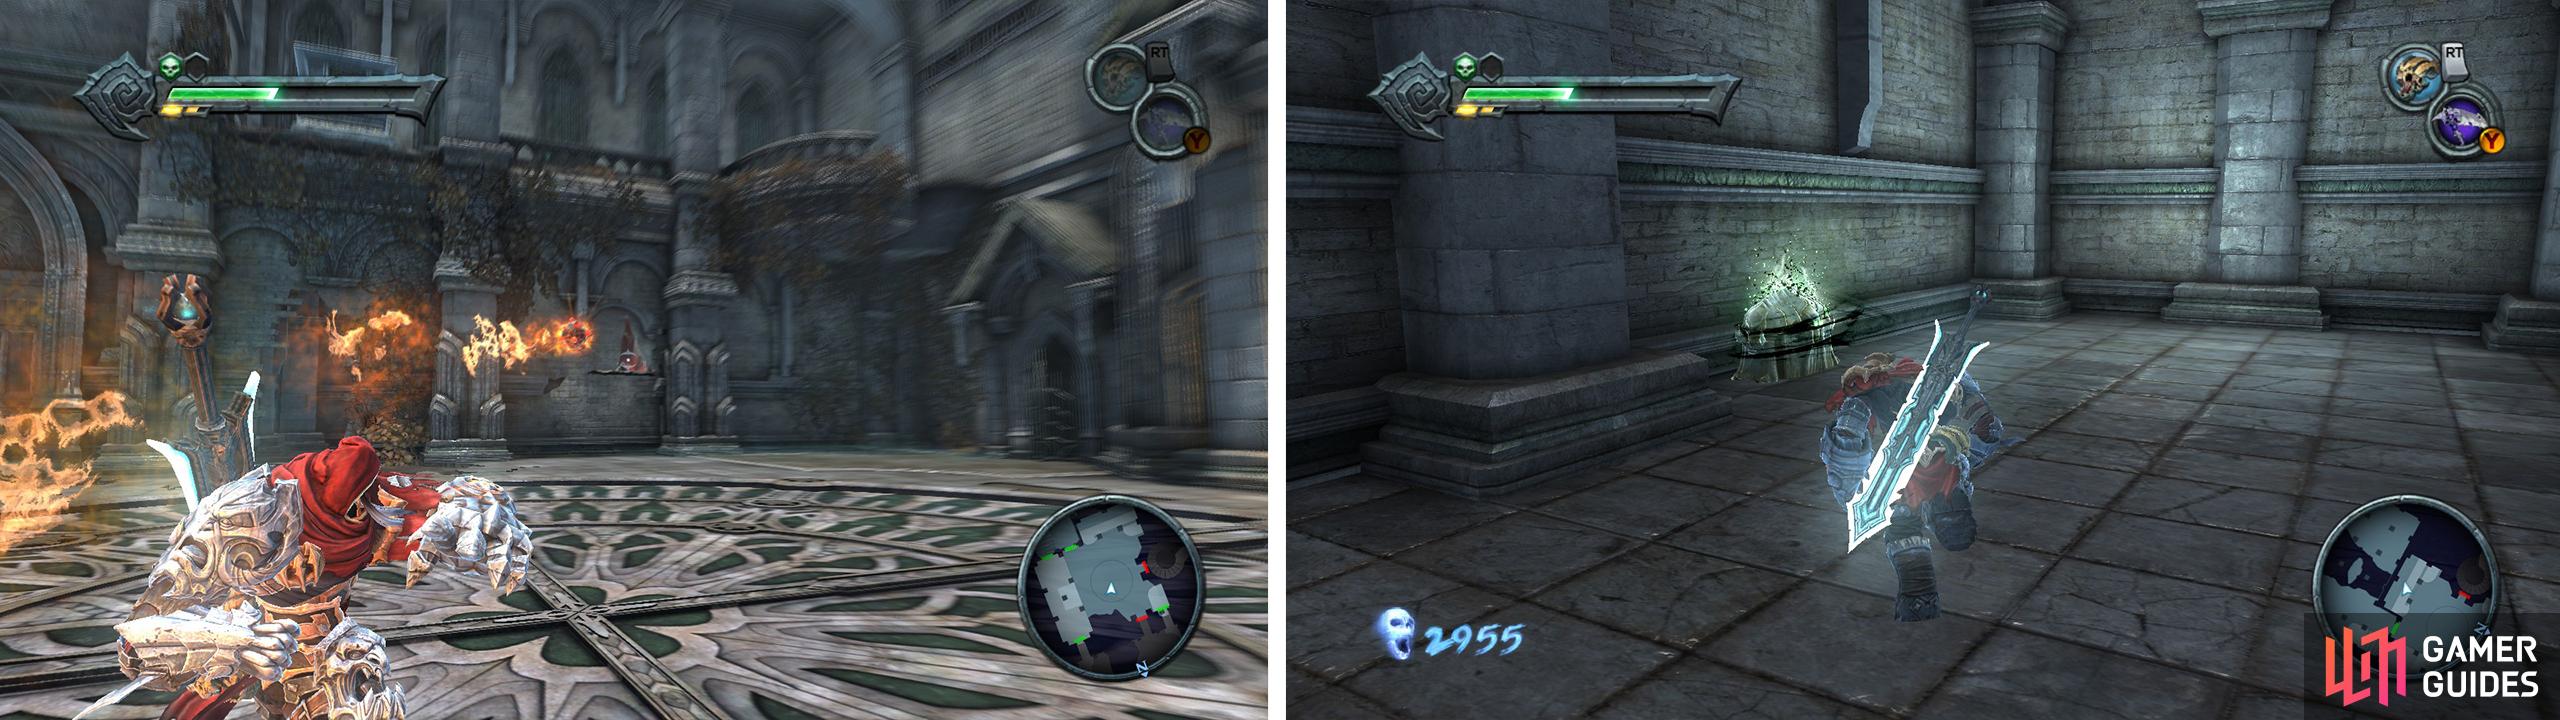 Throw a bomb through the window (left) to reveal a Life Stone Chest (right).